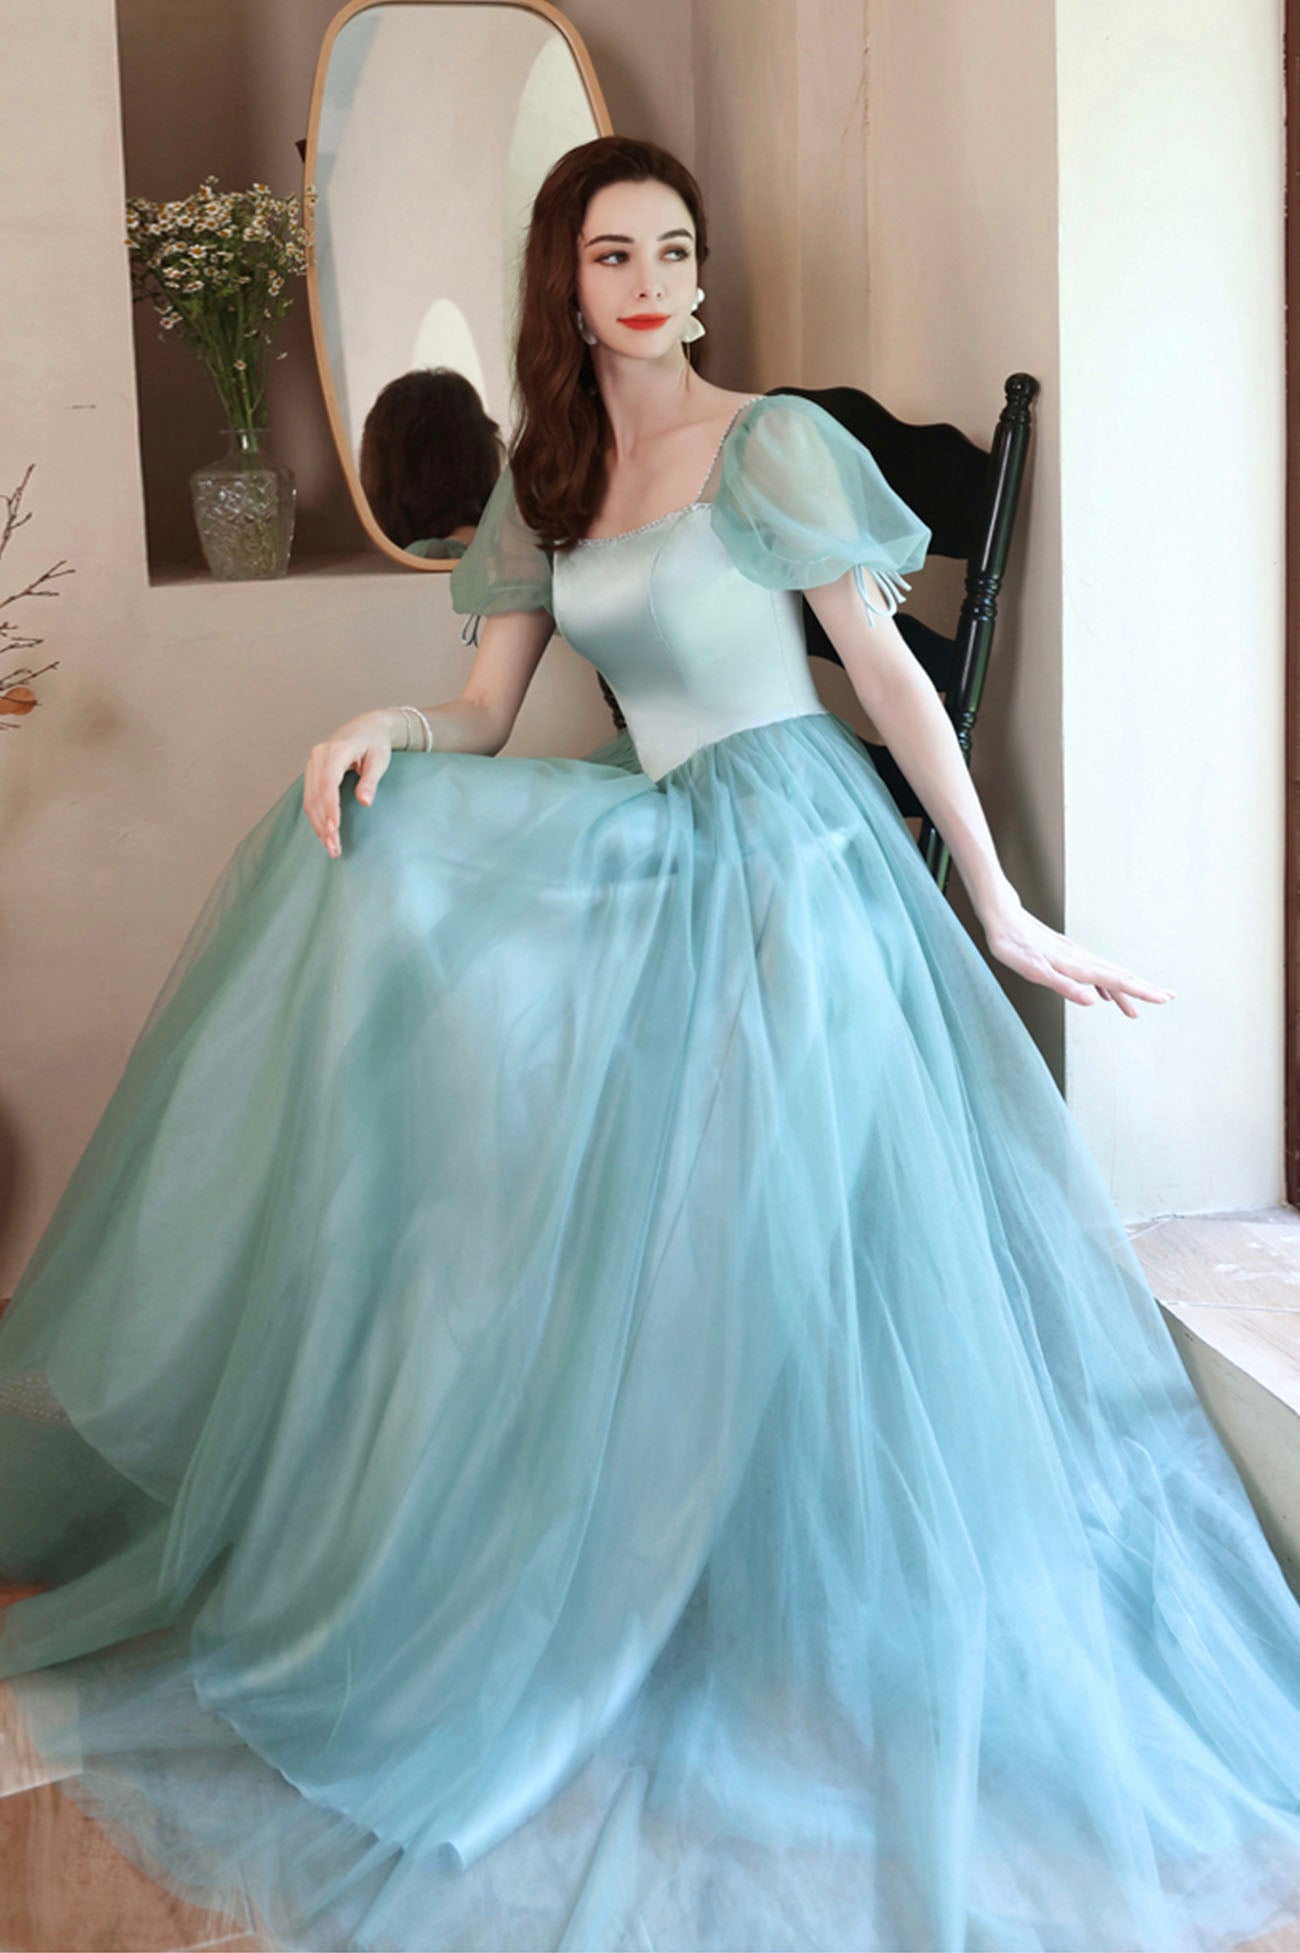 A-Line Satin Tulle Long Prom Dress, Green Short Sleeve Evening Party Dress